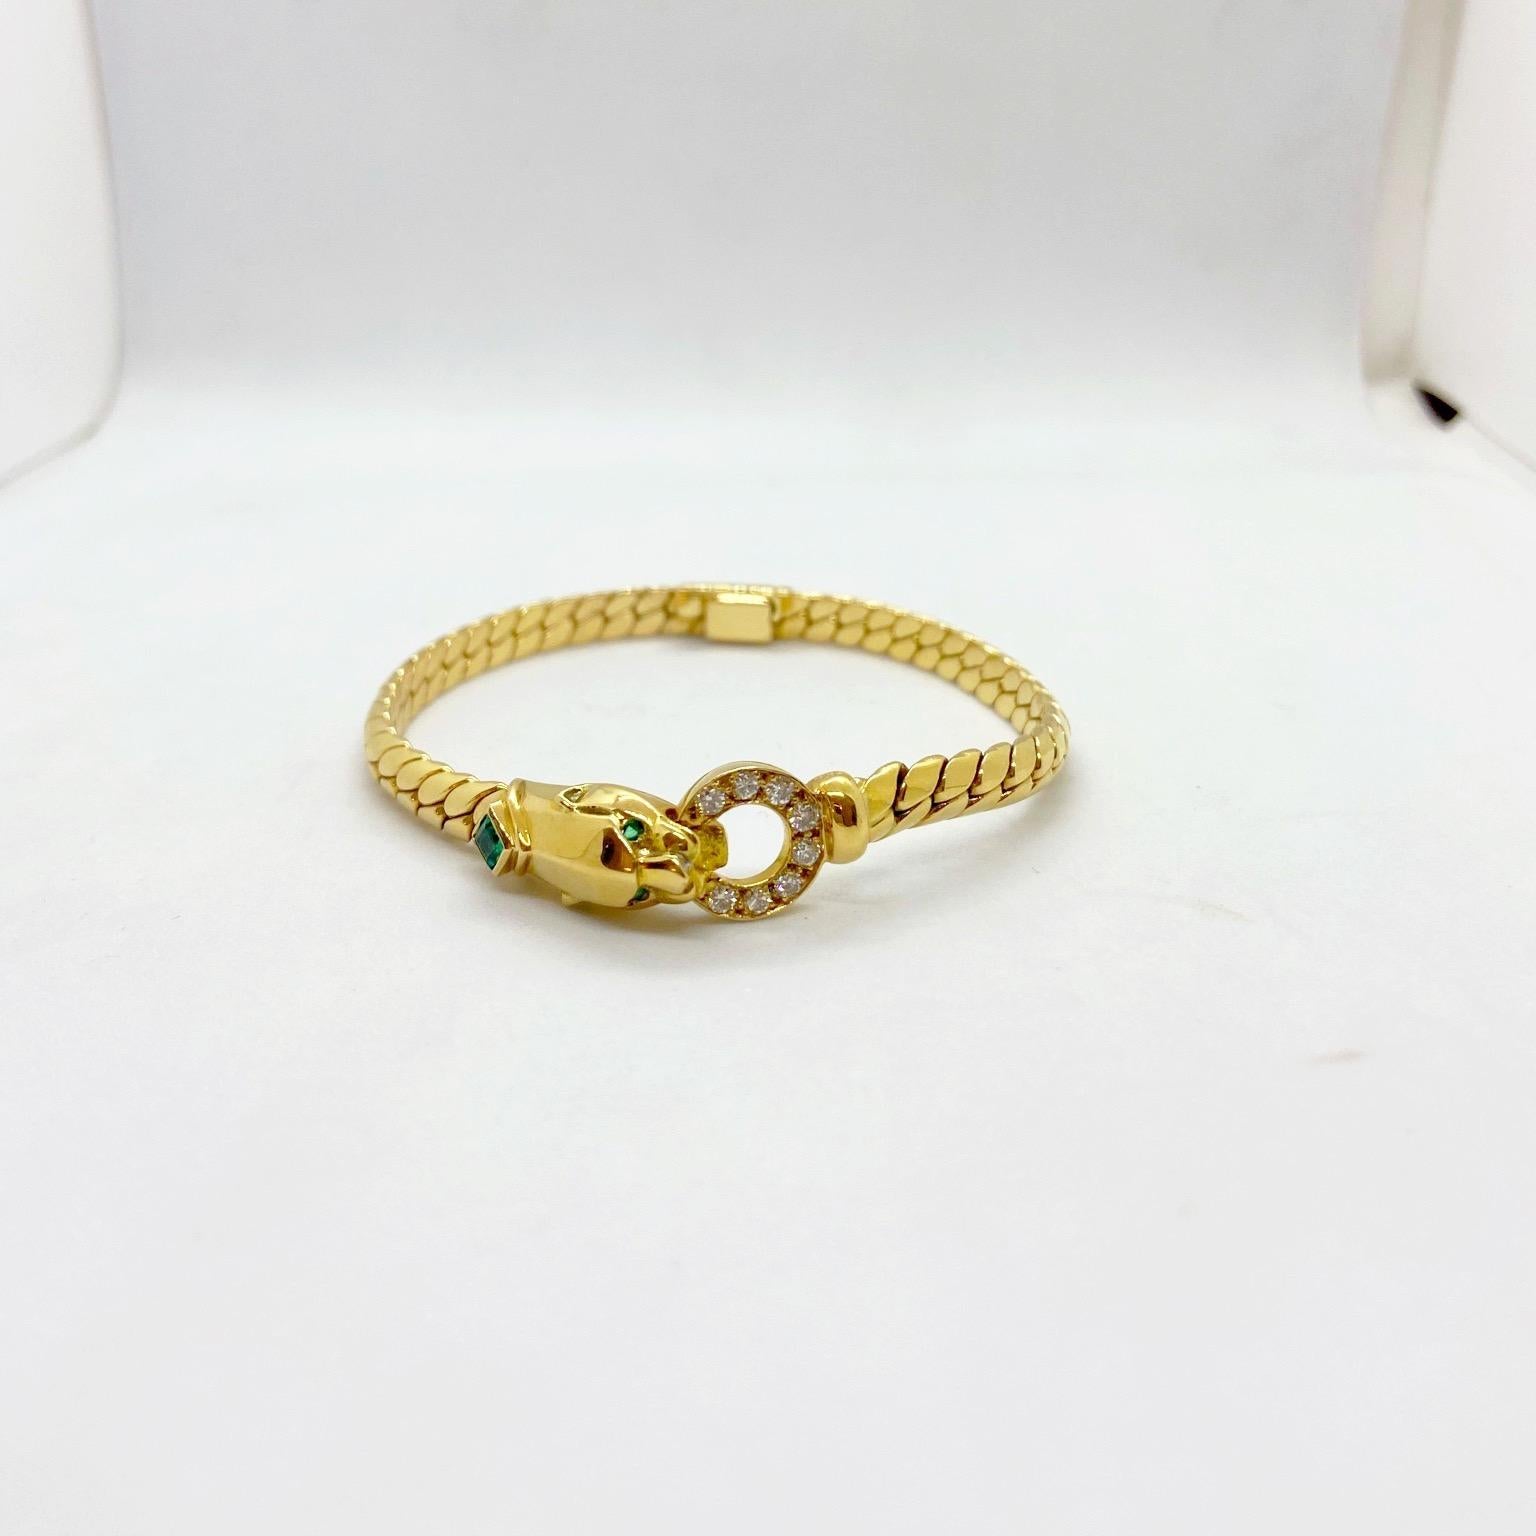 18 karat yellow gold bracelet designed with a shiny gold panther head set with emerald eyes. His neck is set with a square emerald and in his mouth he holds a diamond ring. The central motif is set in a gold link chain measuring 7.25